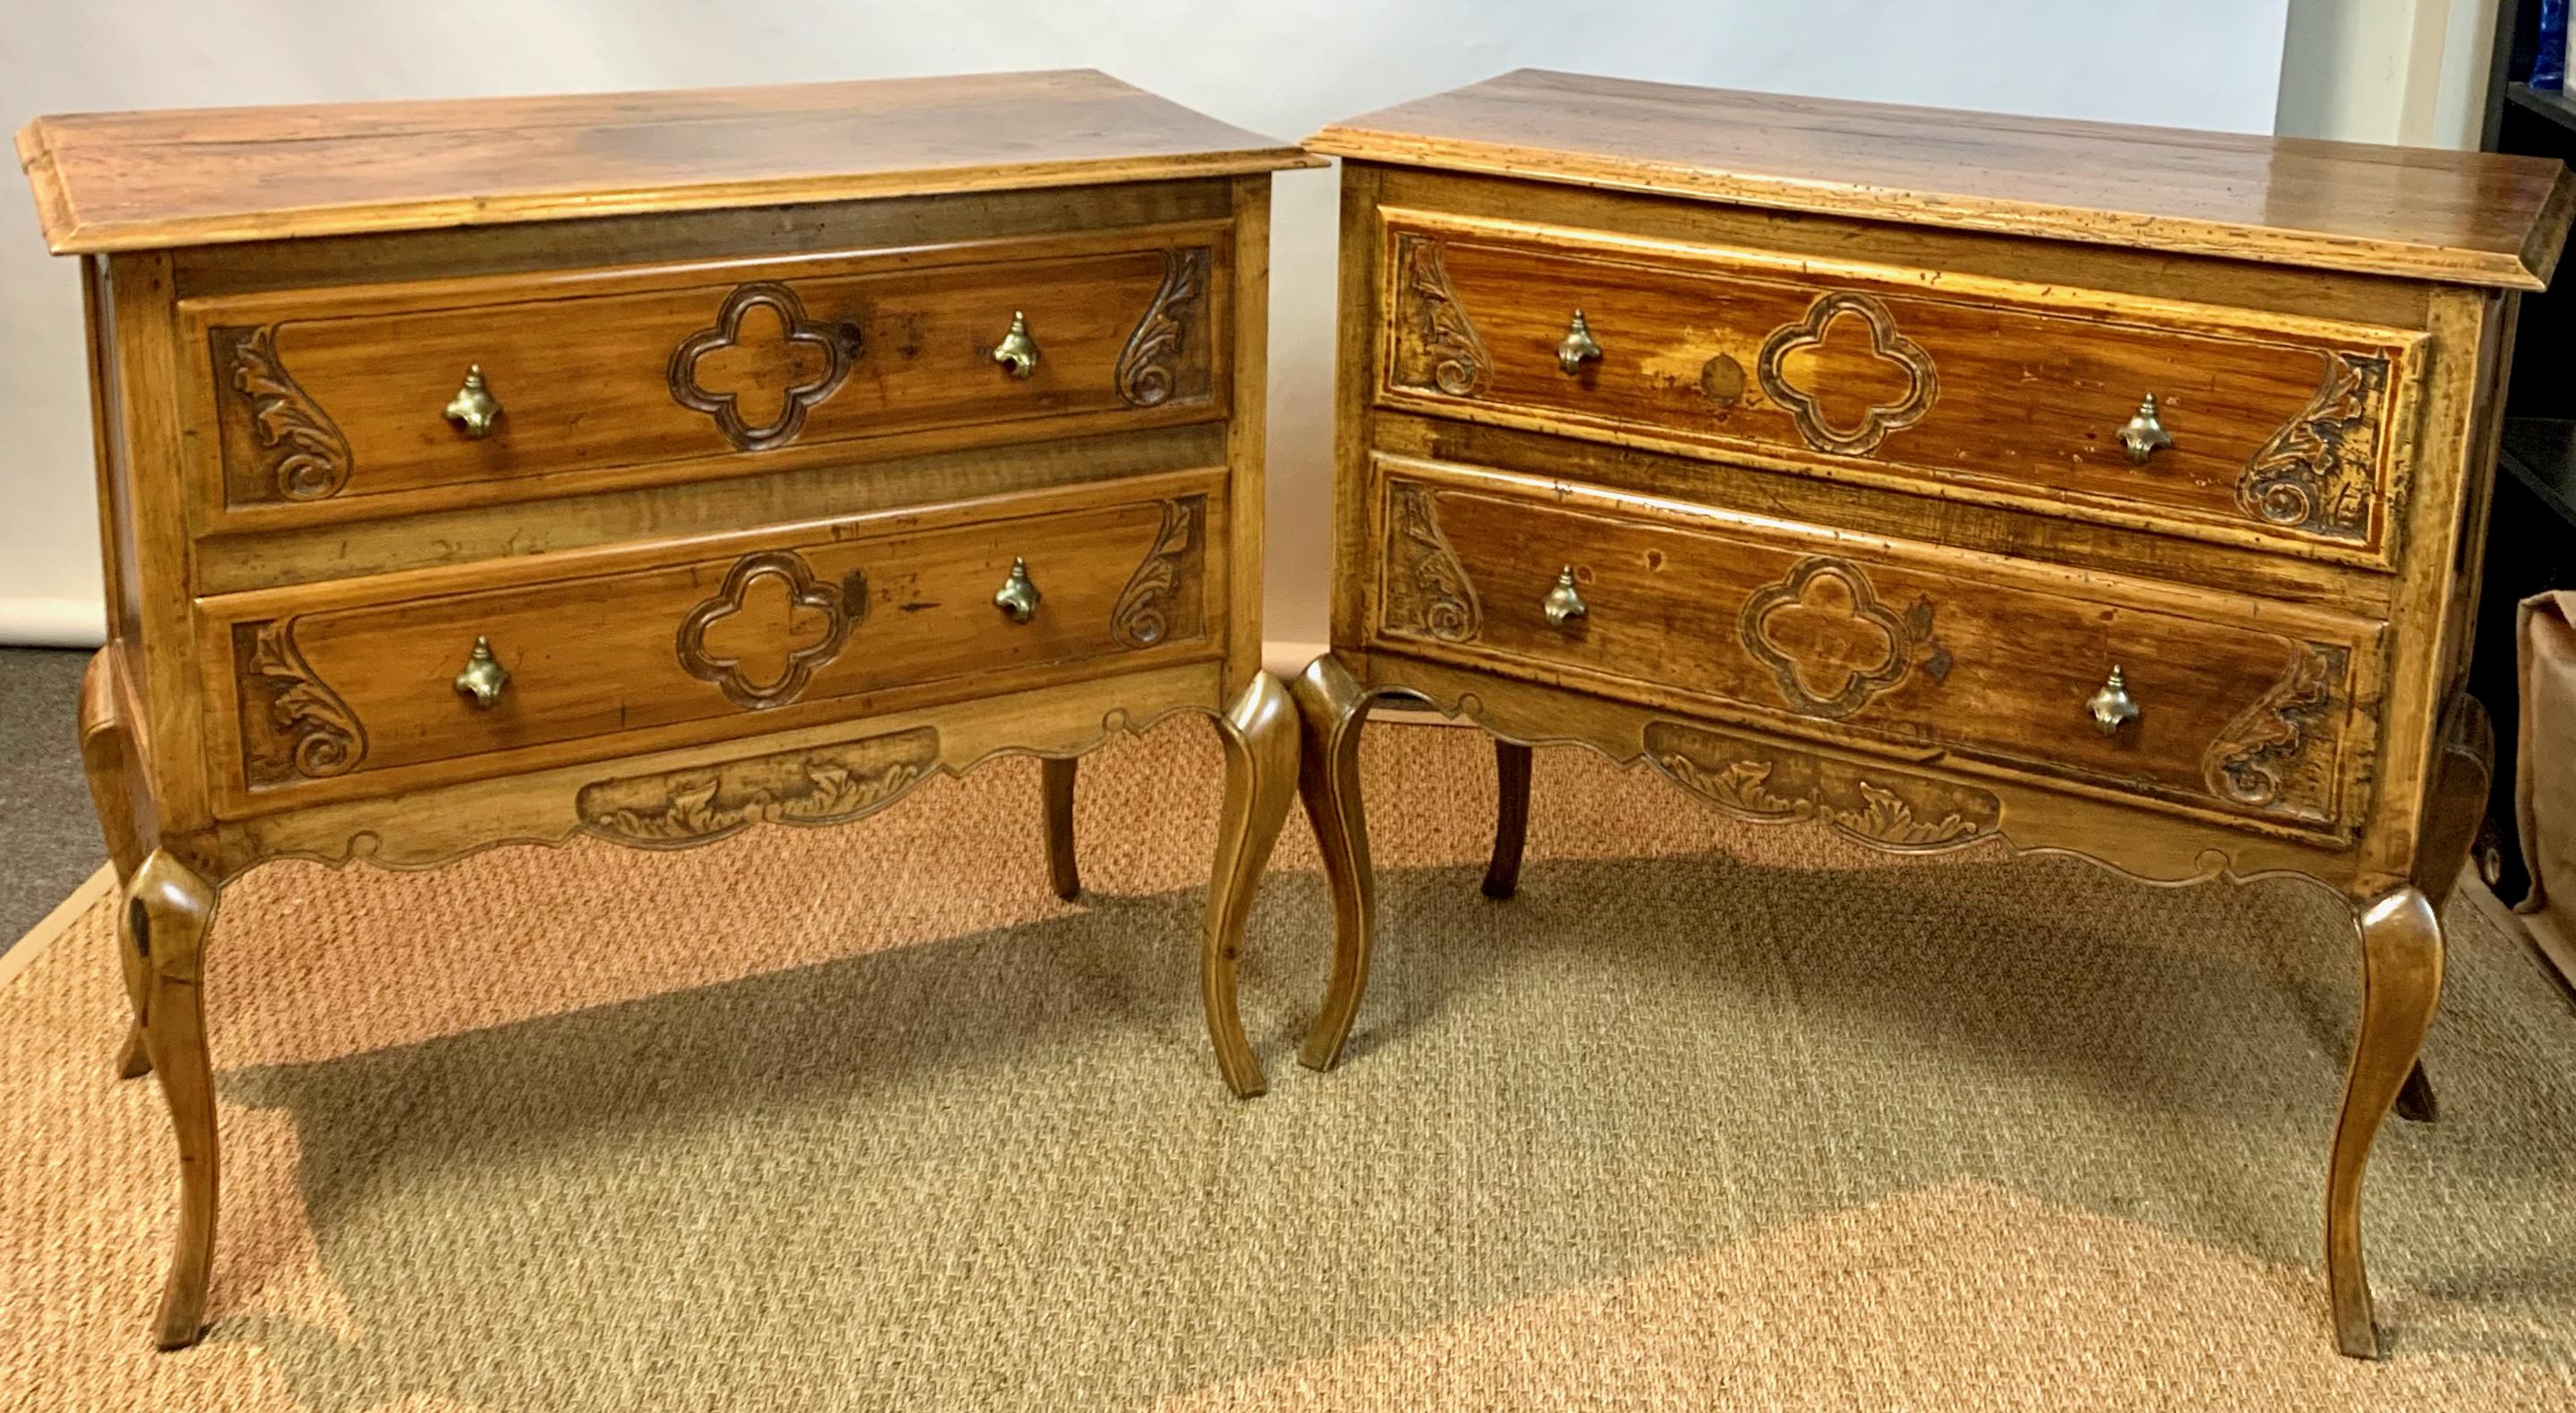 Hand-Crafted Pair of Italian Two-Drawer Chests or Bedside Tables